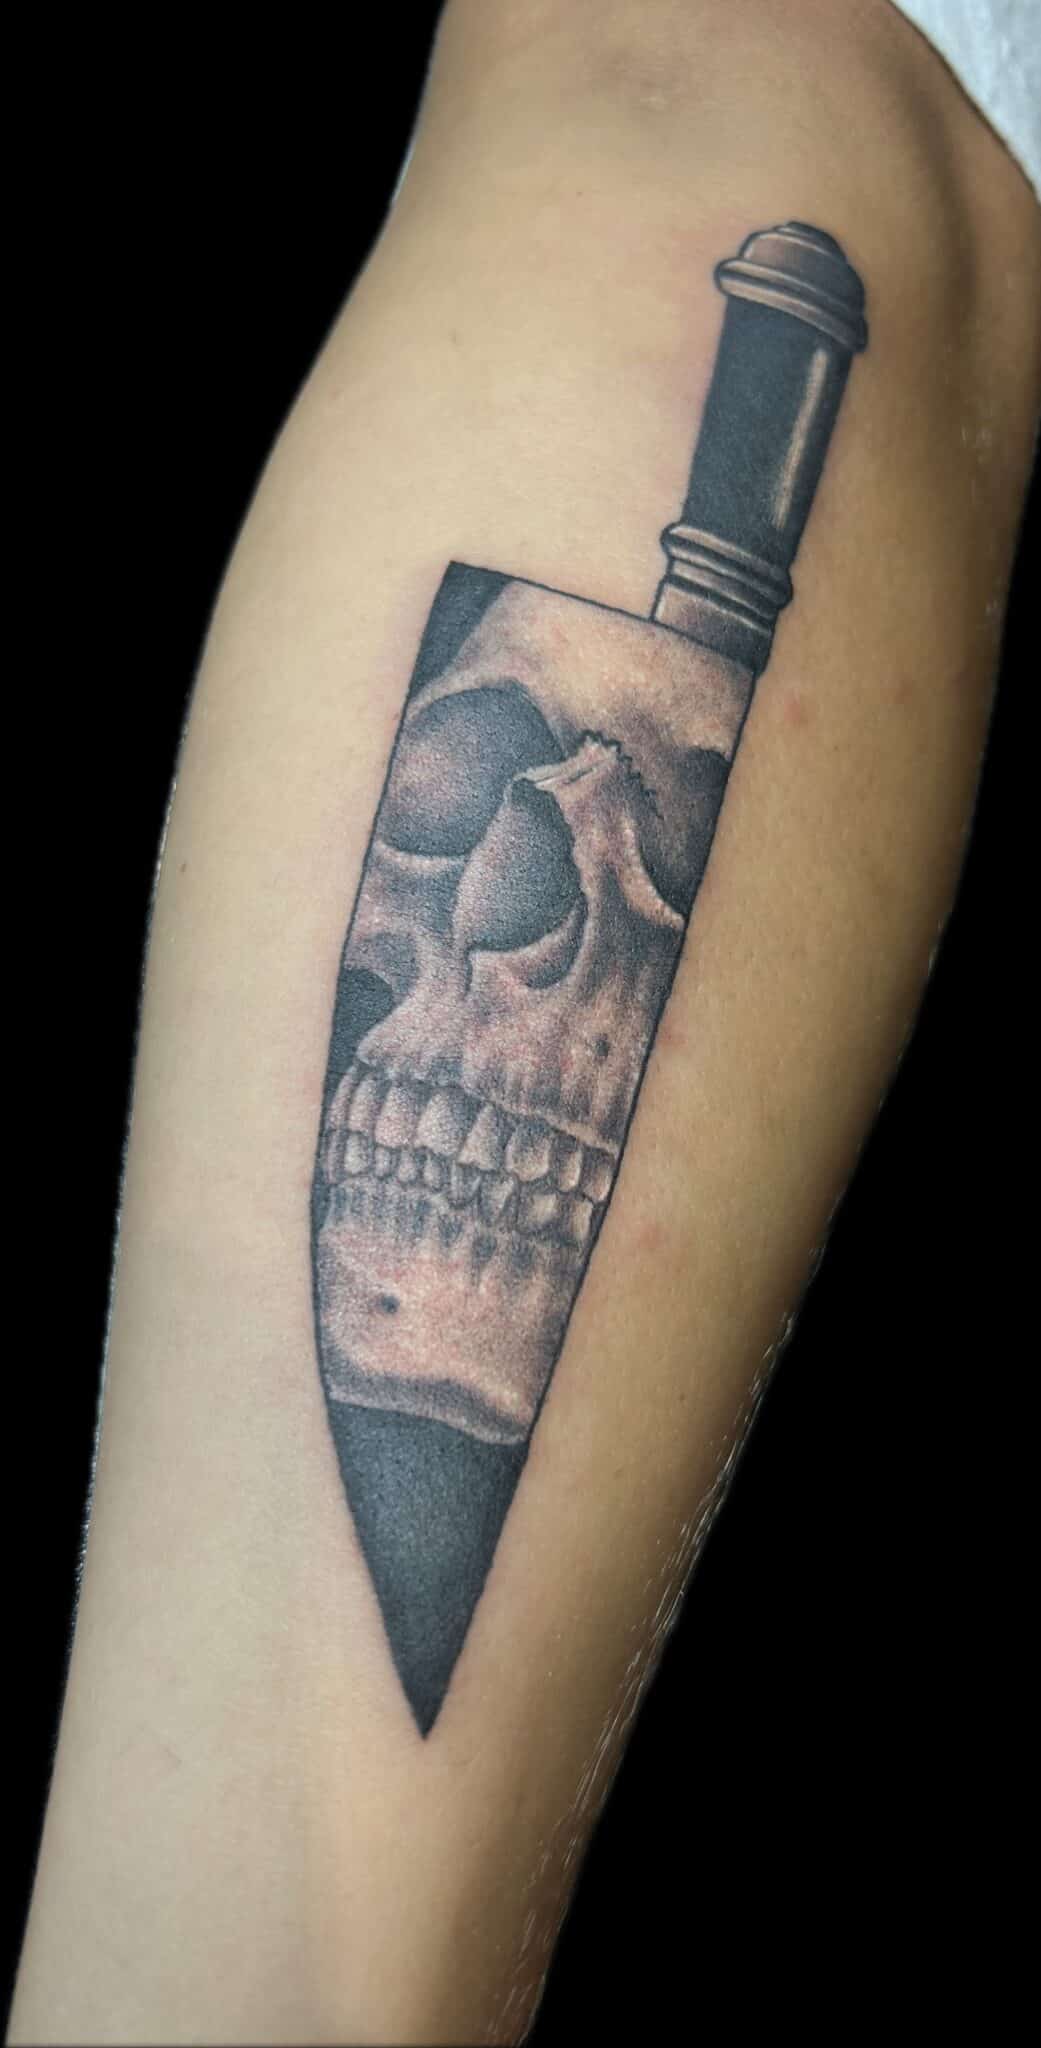 chef's knife with realistic skull tattoo